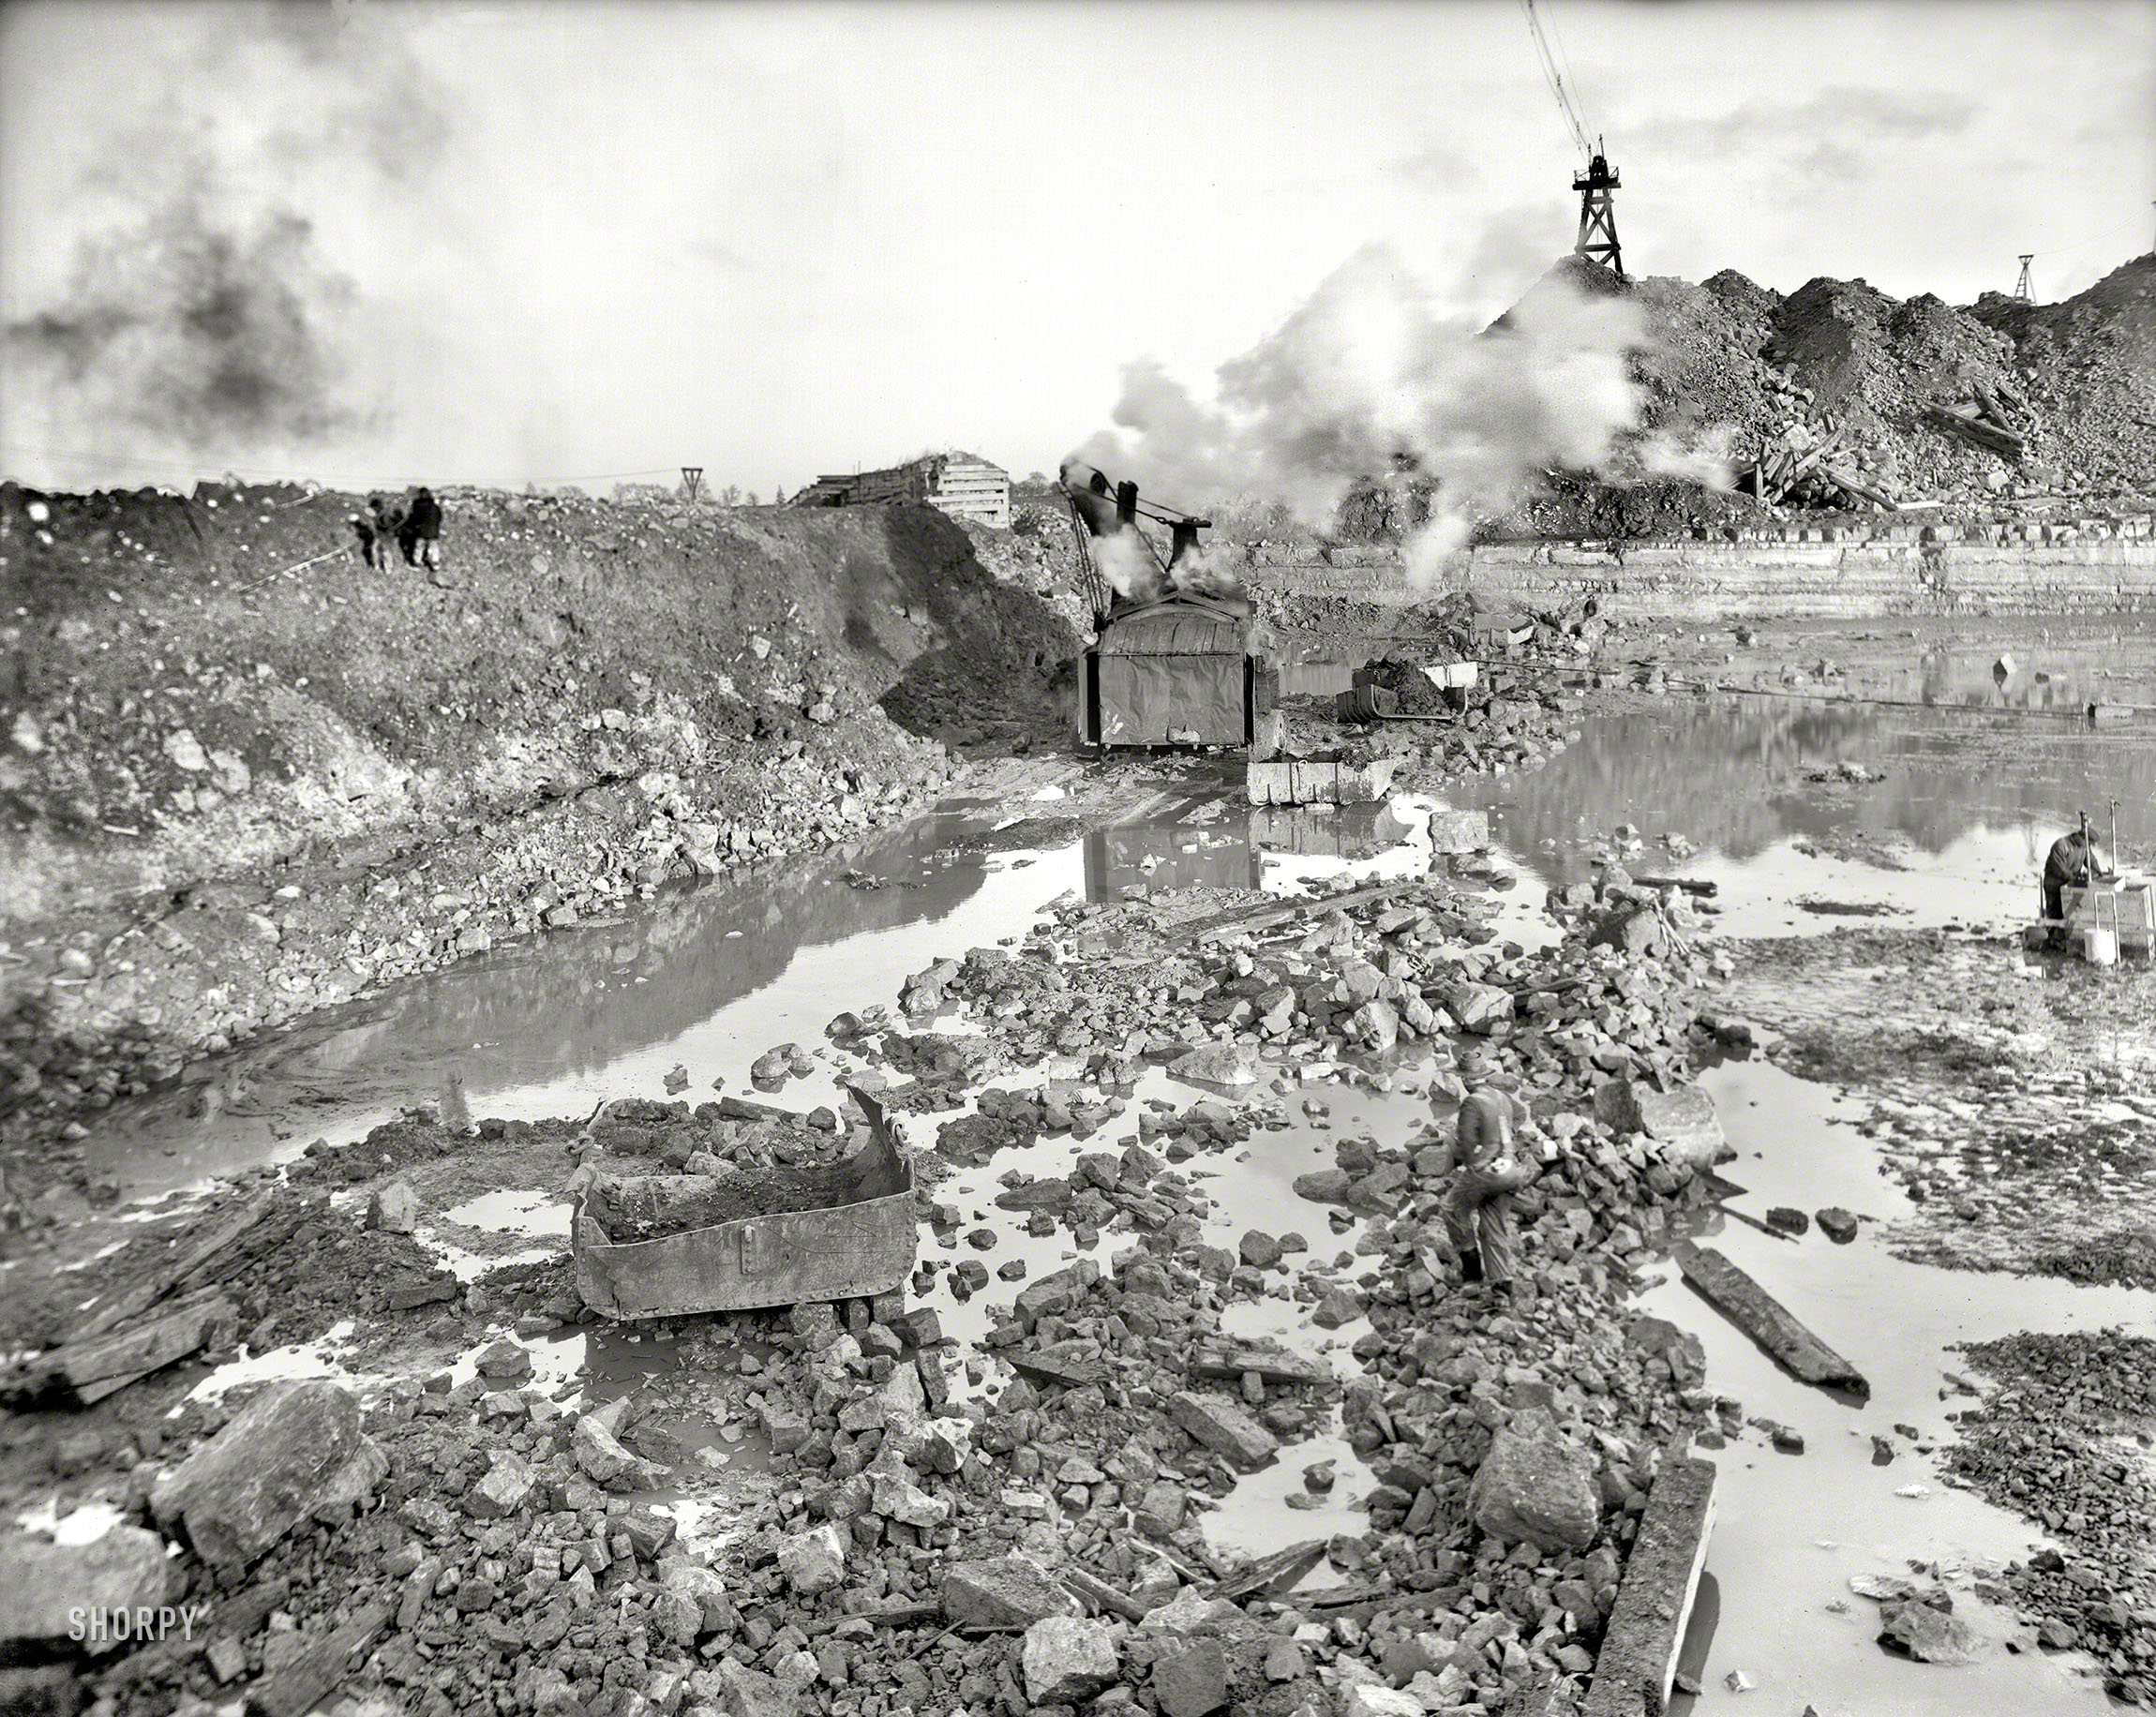 Circa 1910. "Steam shovel removing a section of coffer dam, Livingstone Channel, Detroit, Michigan." Construction of the navigation channel along the Detroit River. 8x10 inch glass negative, Detroit Publishing Company. View full size.